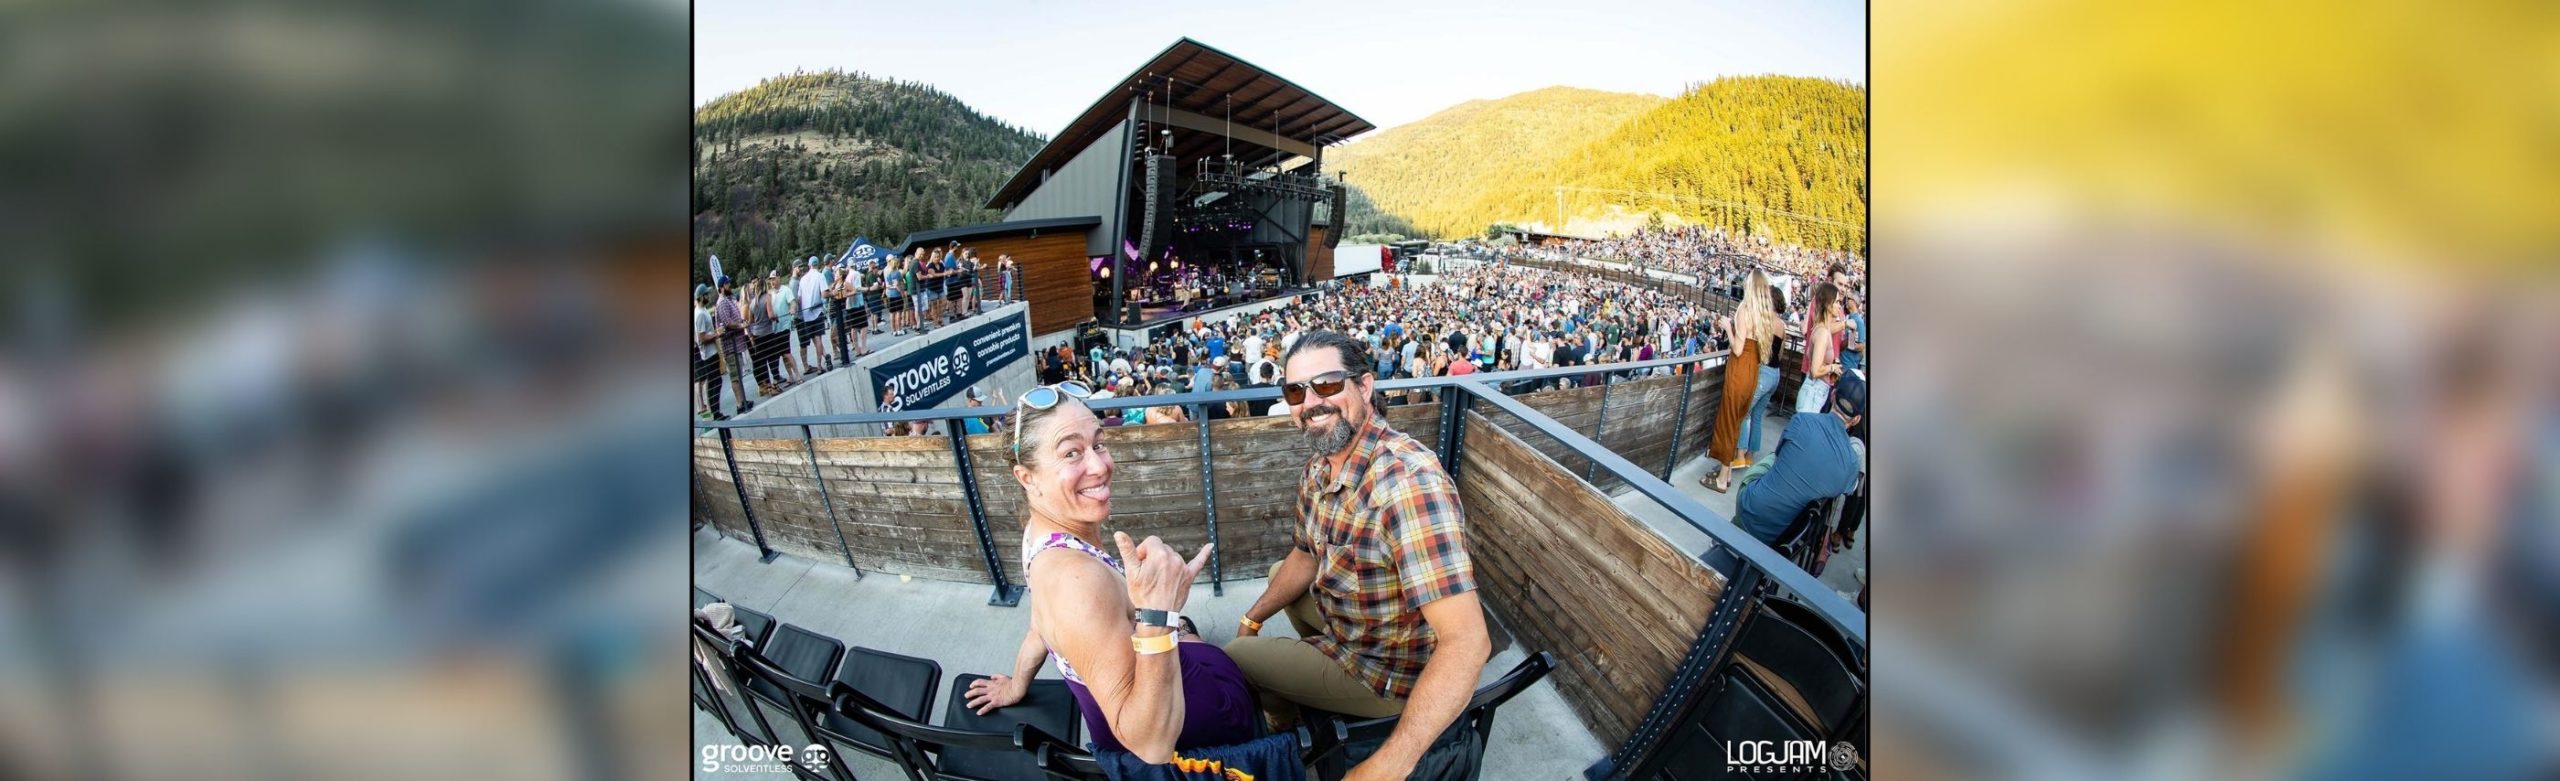 Premium Box Seats Released for Atmosphere & Iration at KettleHouse Amphitheater Image